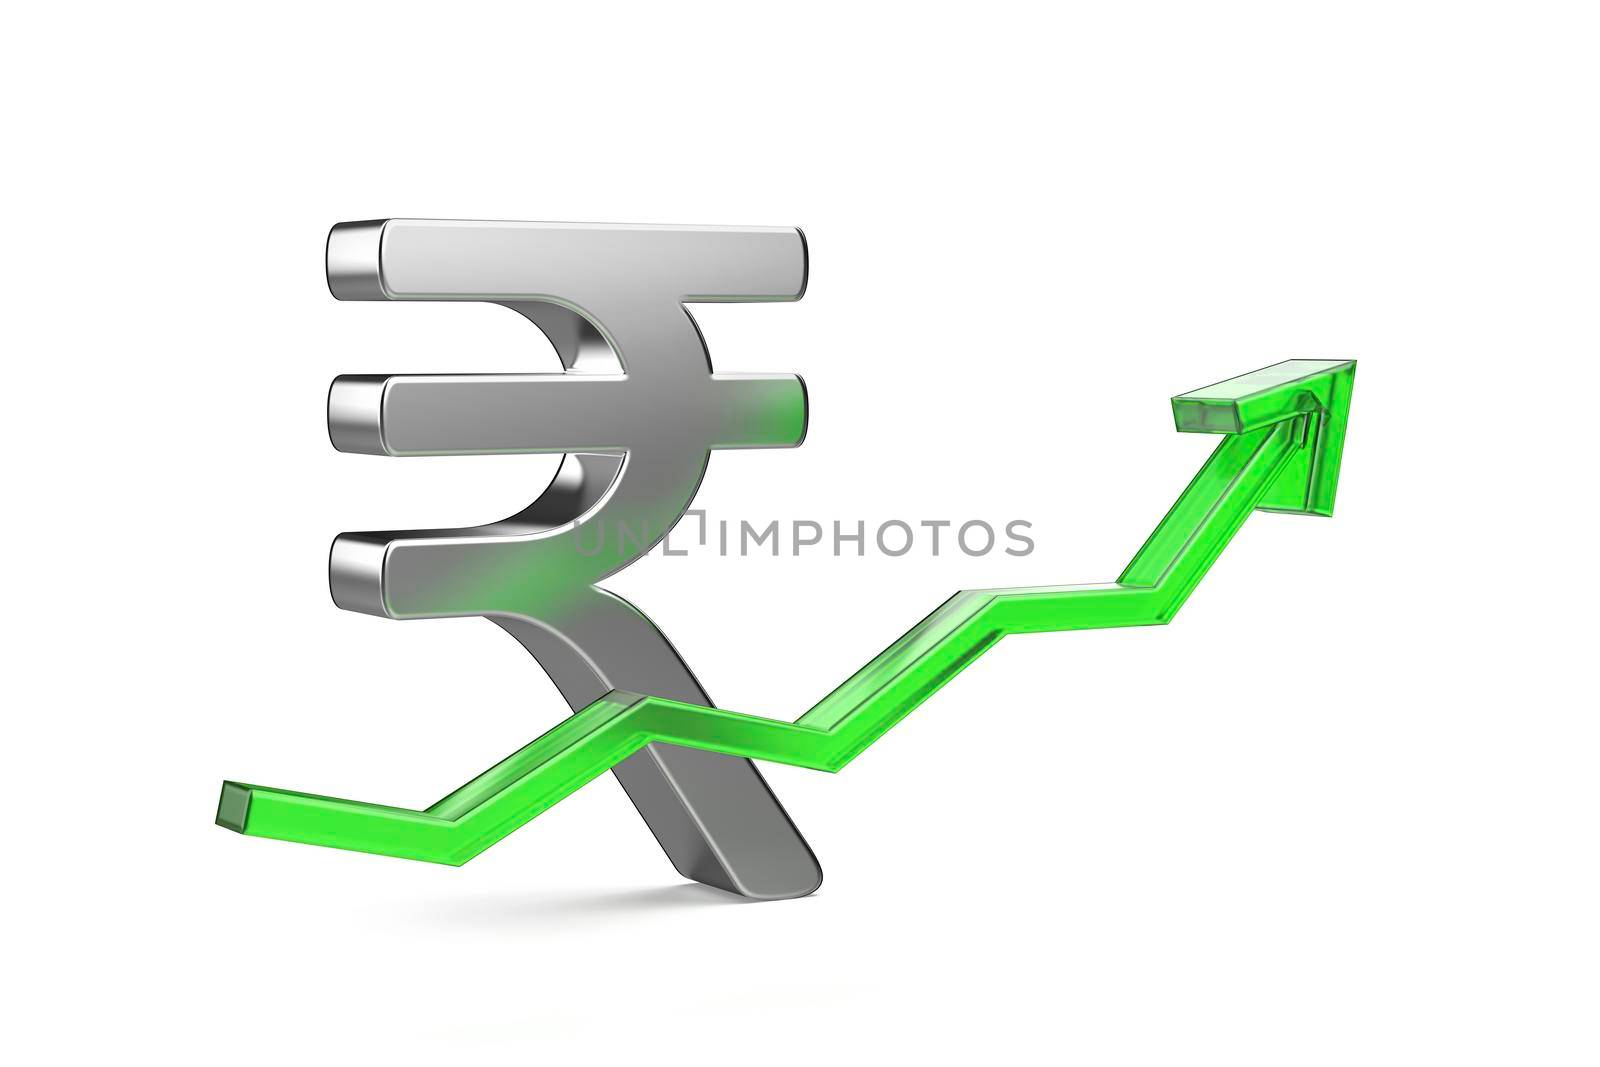 Increasing the value of Indian rupee currency, concept image